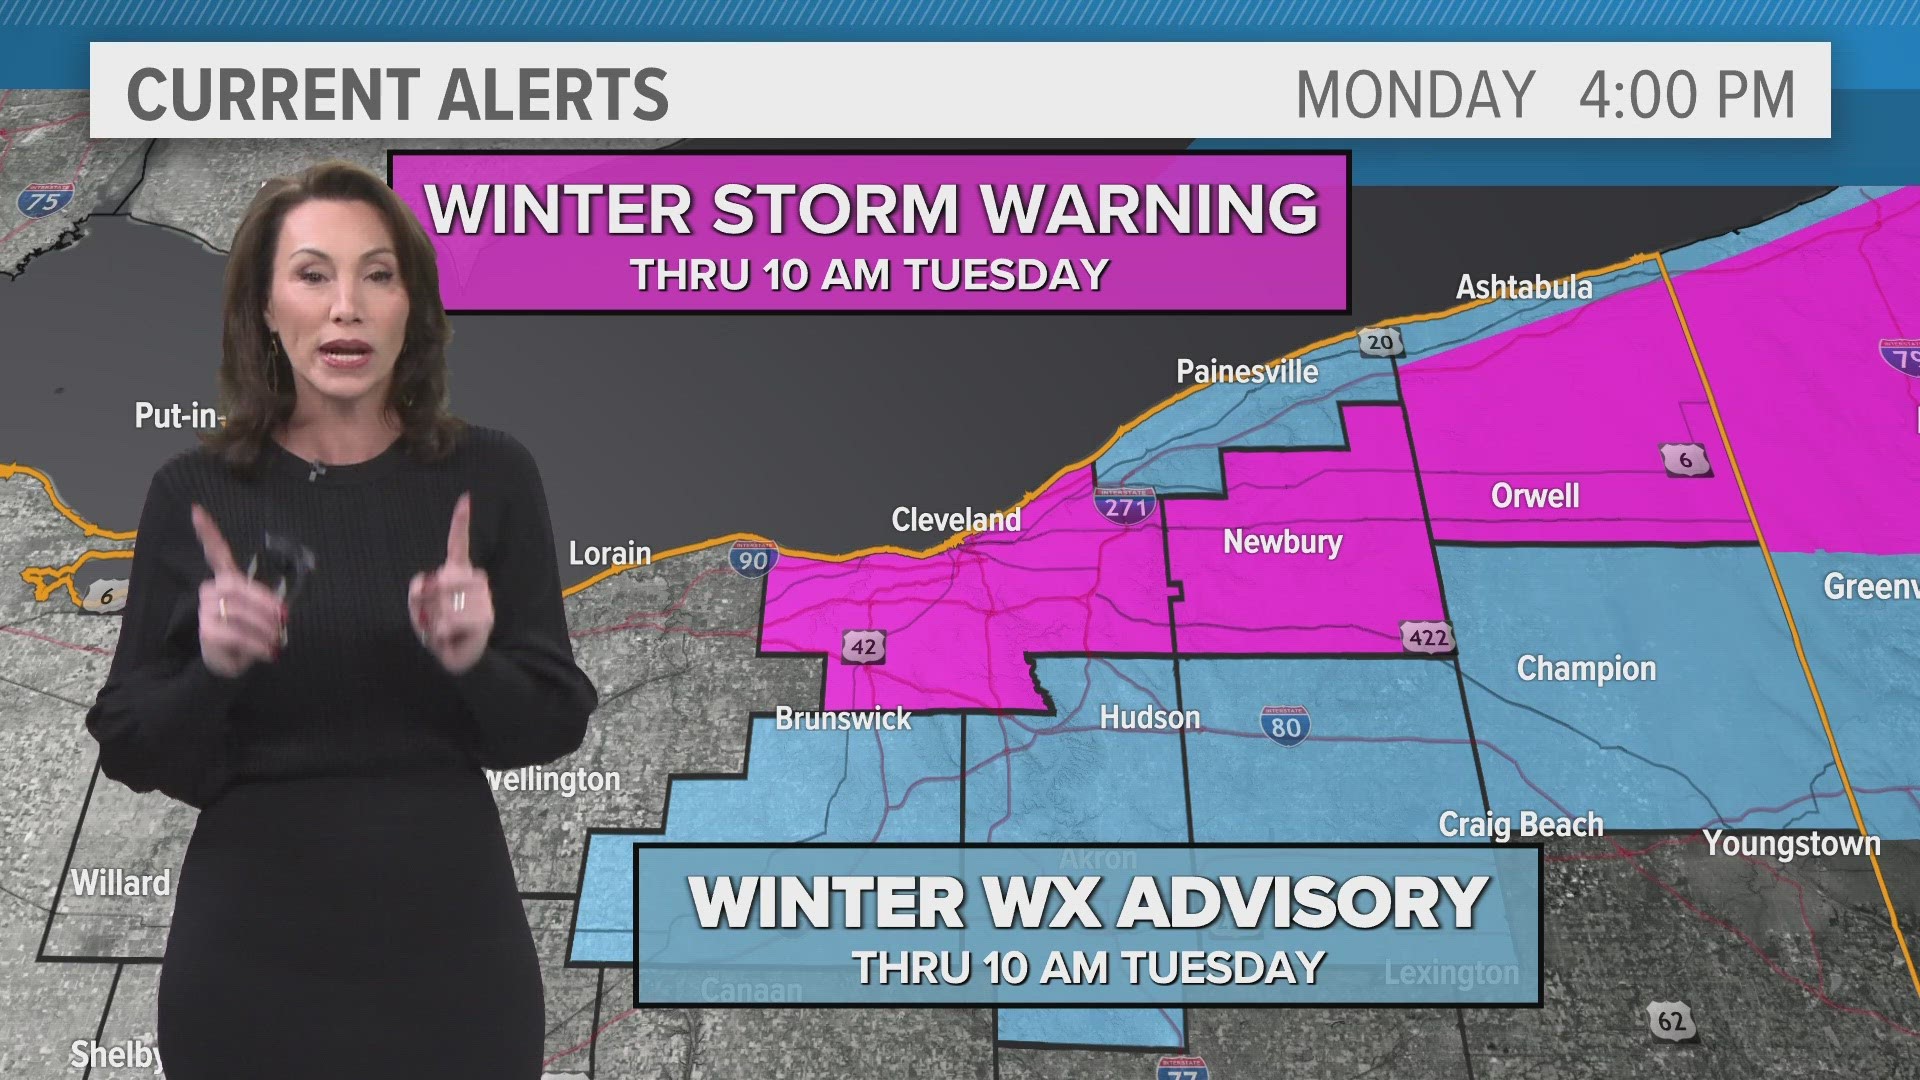 3News is providing real-time weather and traffic updates as accumulating snow impacts Northeast Ohio.